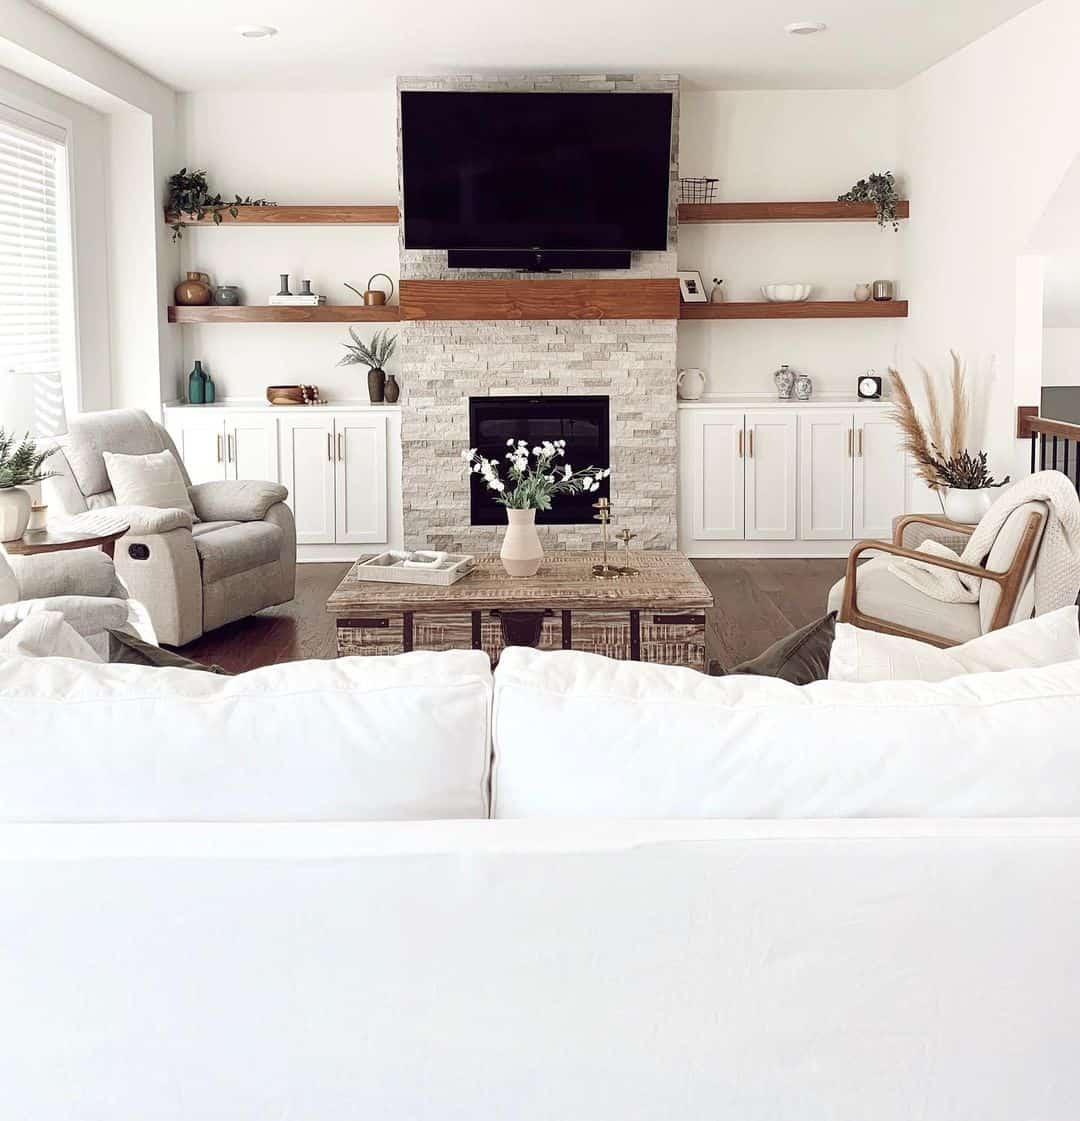 21 Ideas for a TV Above a Fireplace